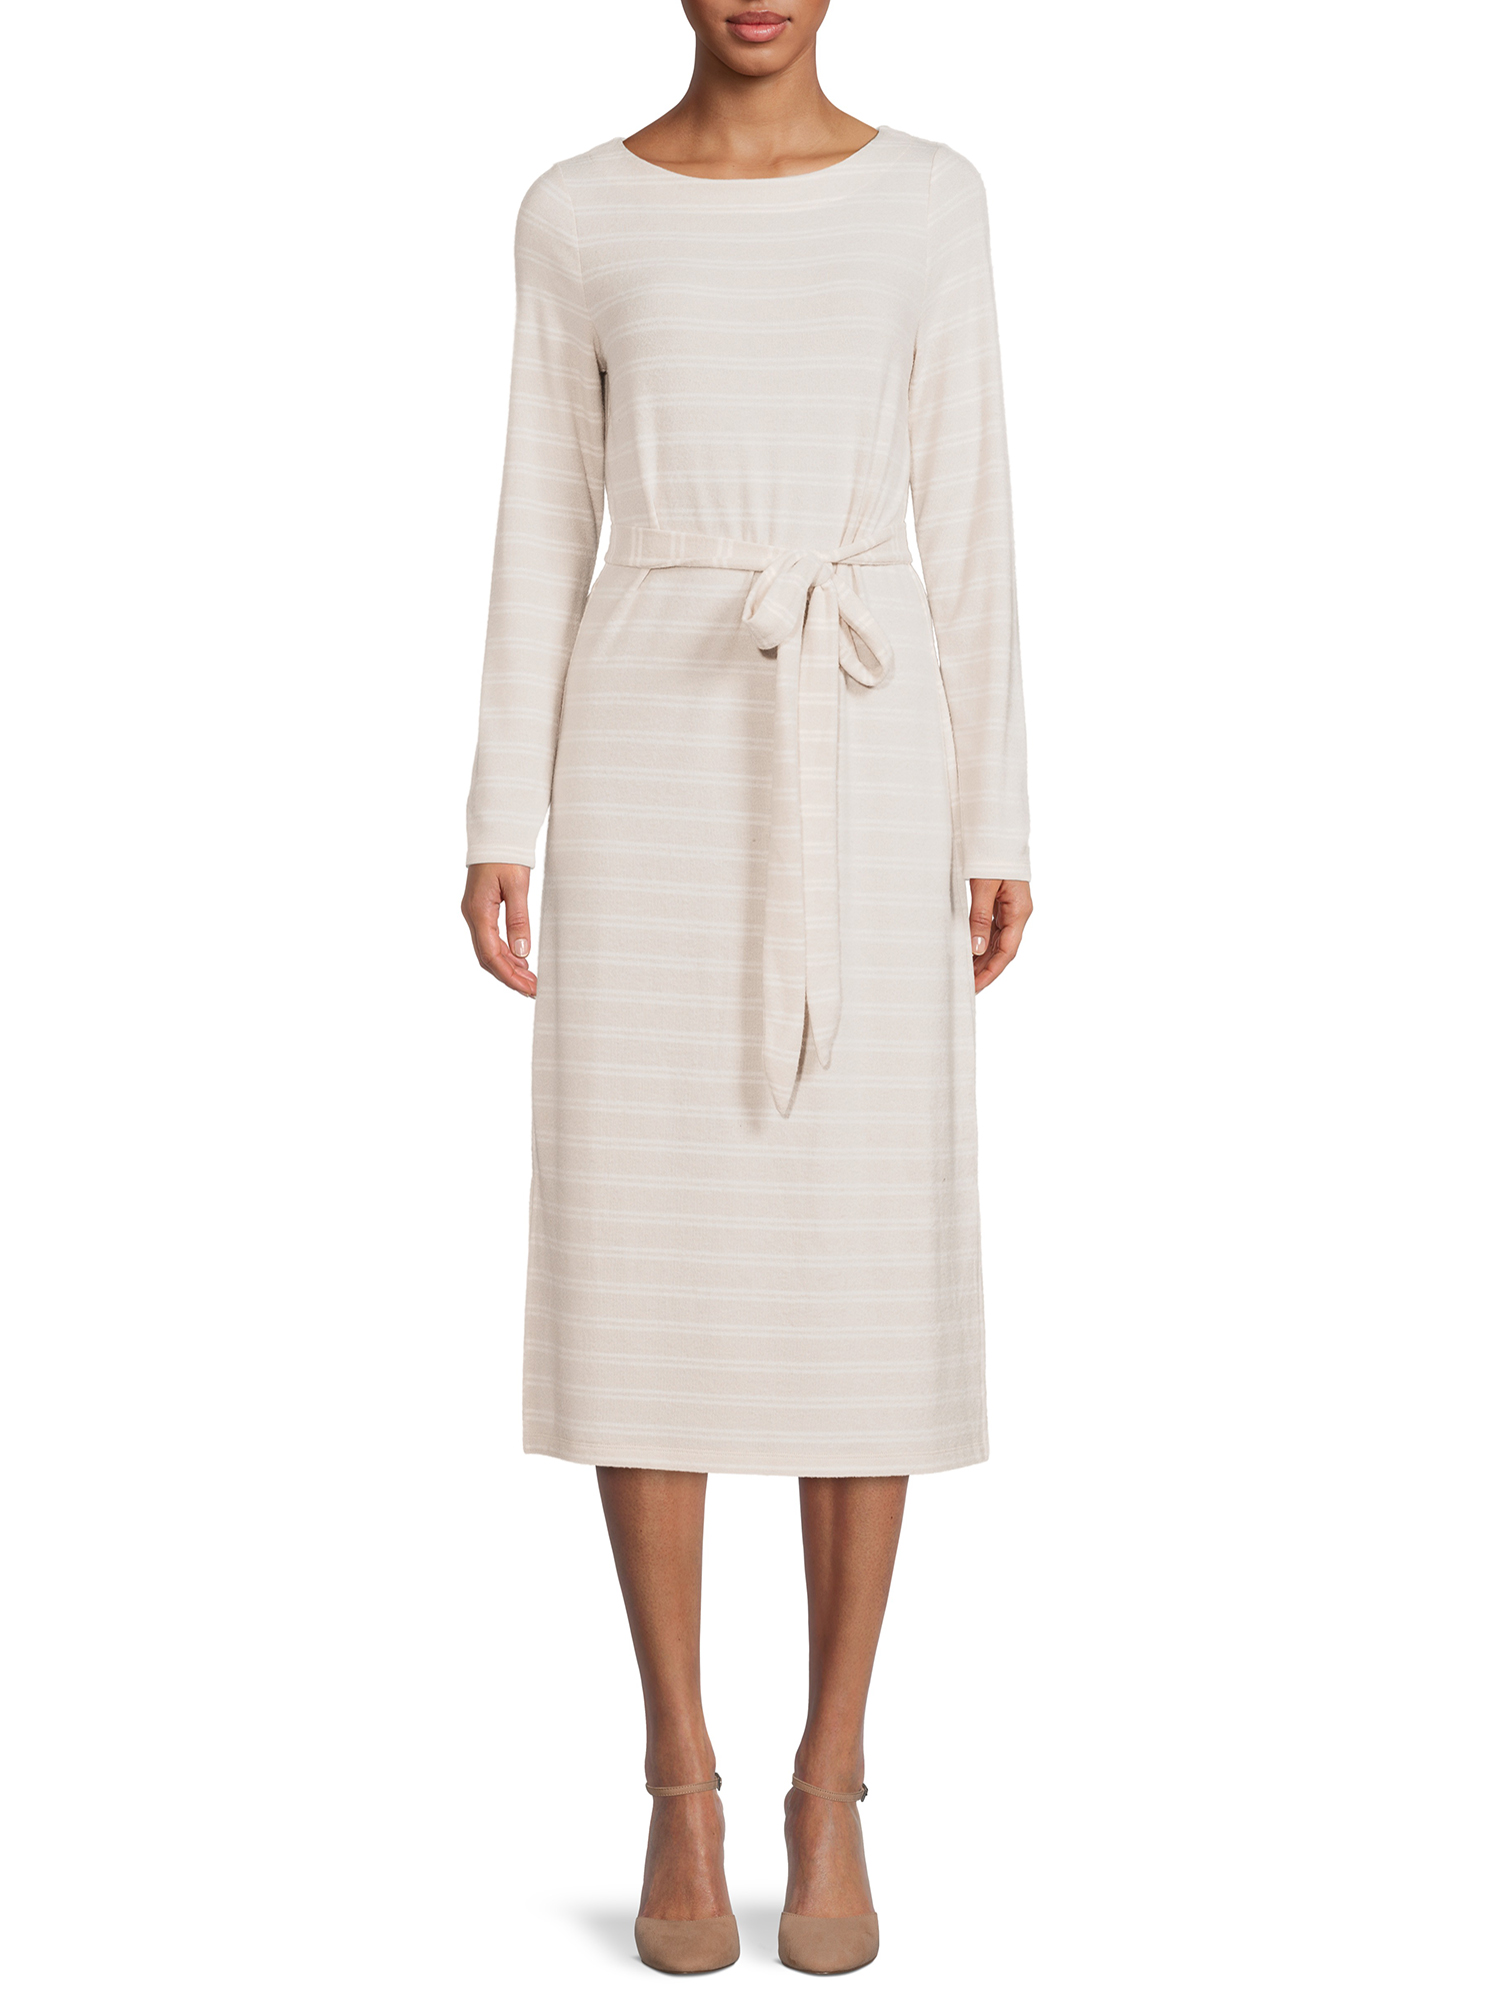 Time and Tru Women's Hacci Dress with Long Sleeves - image 1 of 5